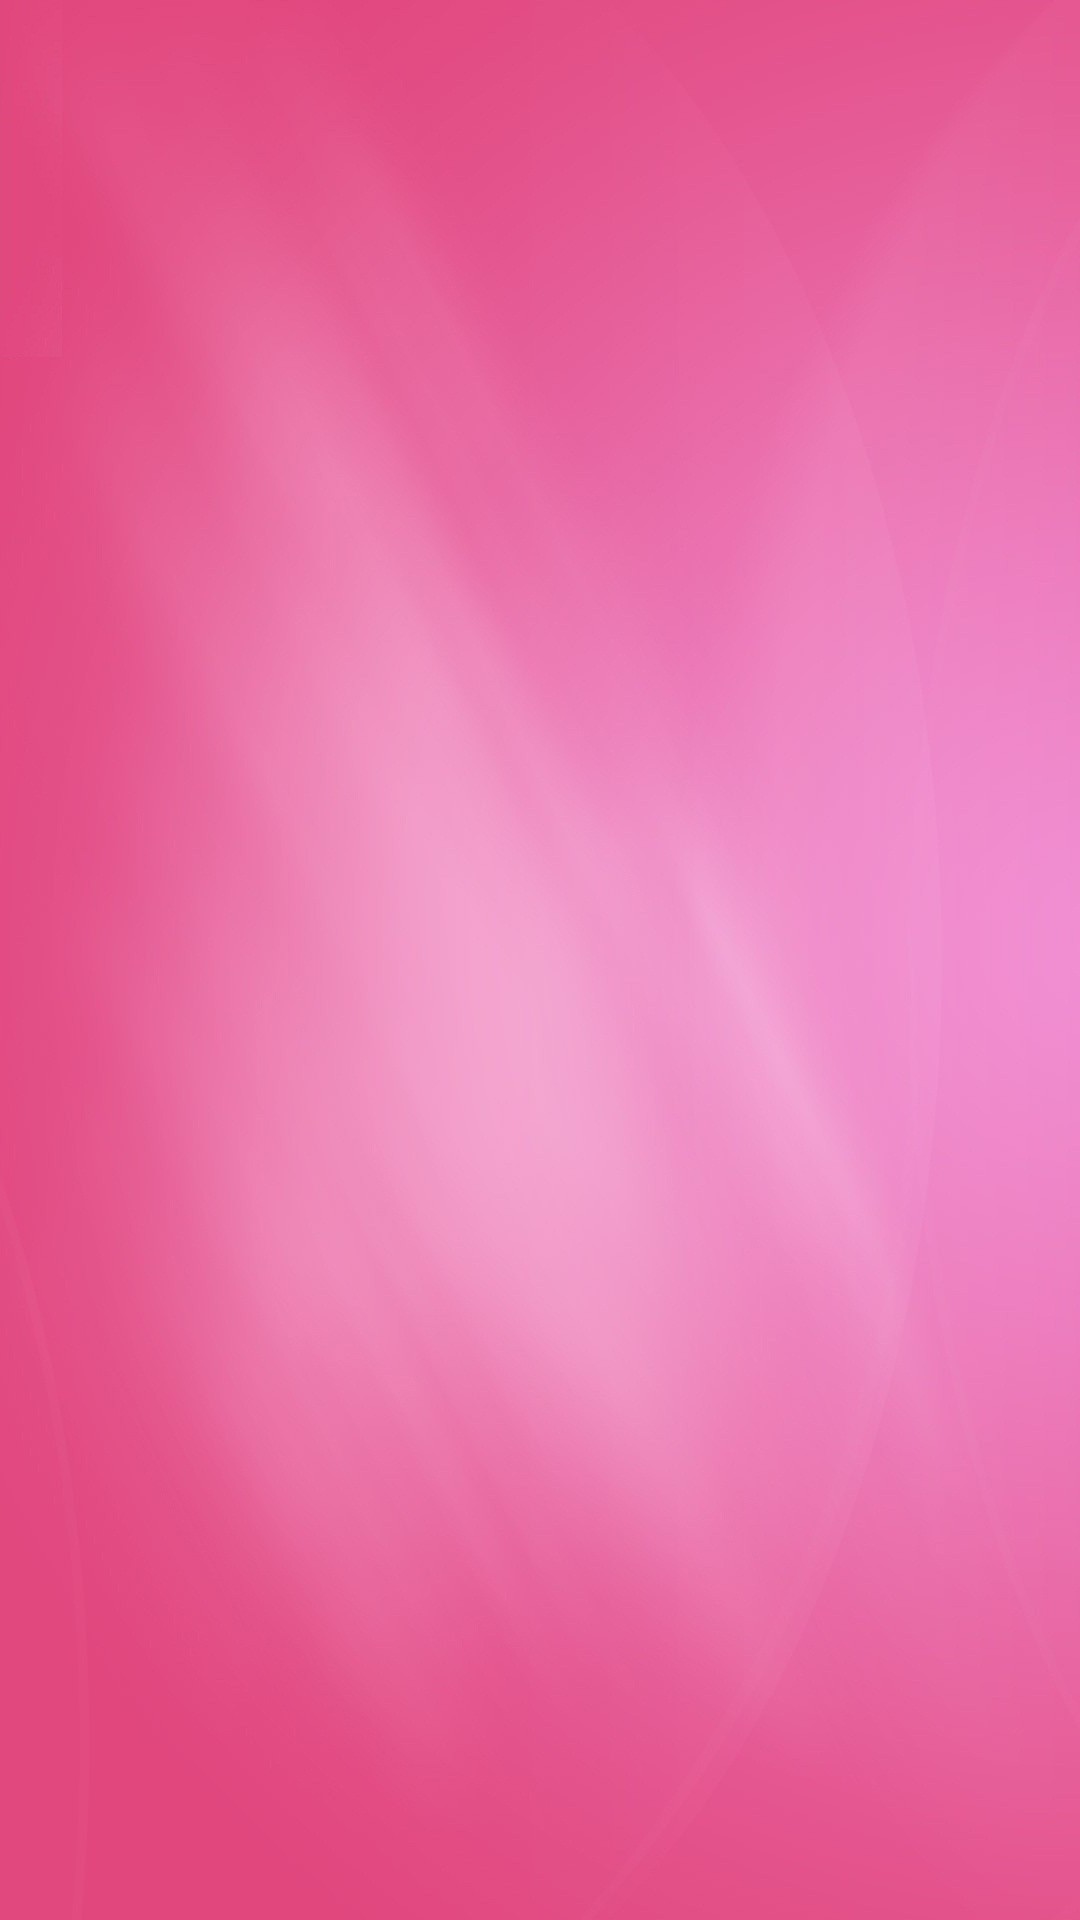 Pink Android Wallpaper HD with HD resolution 1080x1920